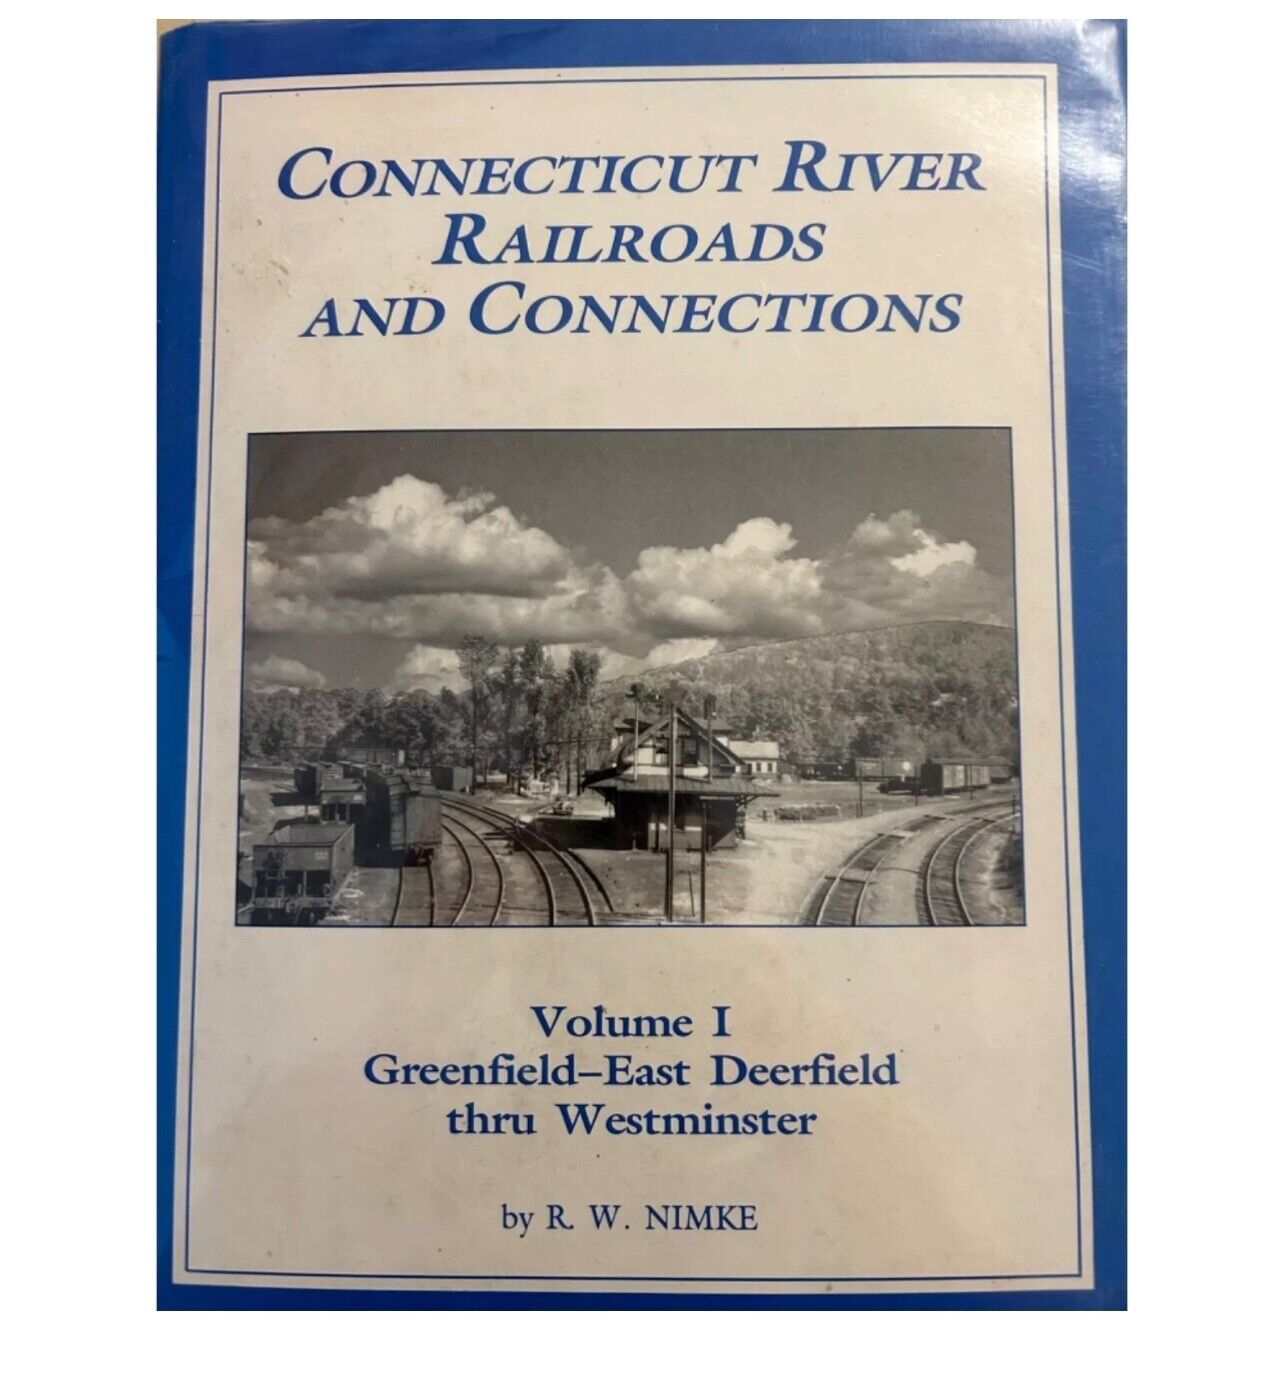 Connecticut River Railroads and Connections Volume 1 Greenfield East Deerfield